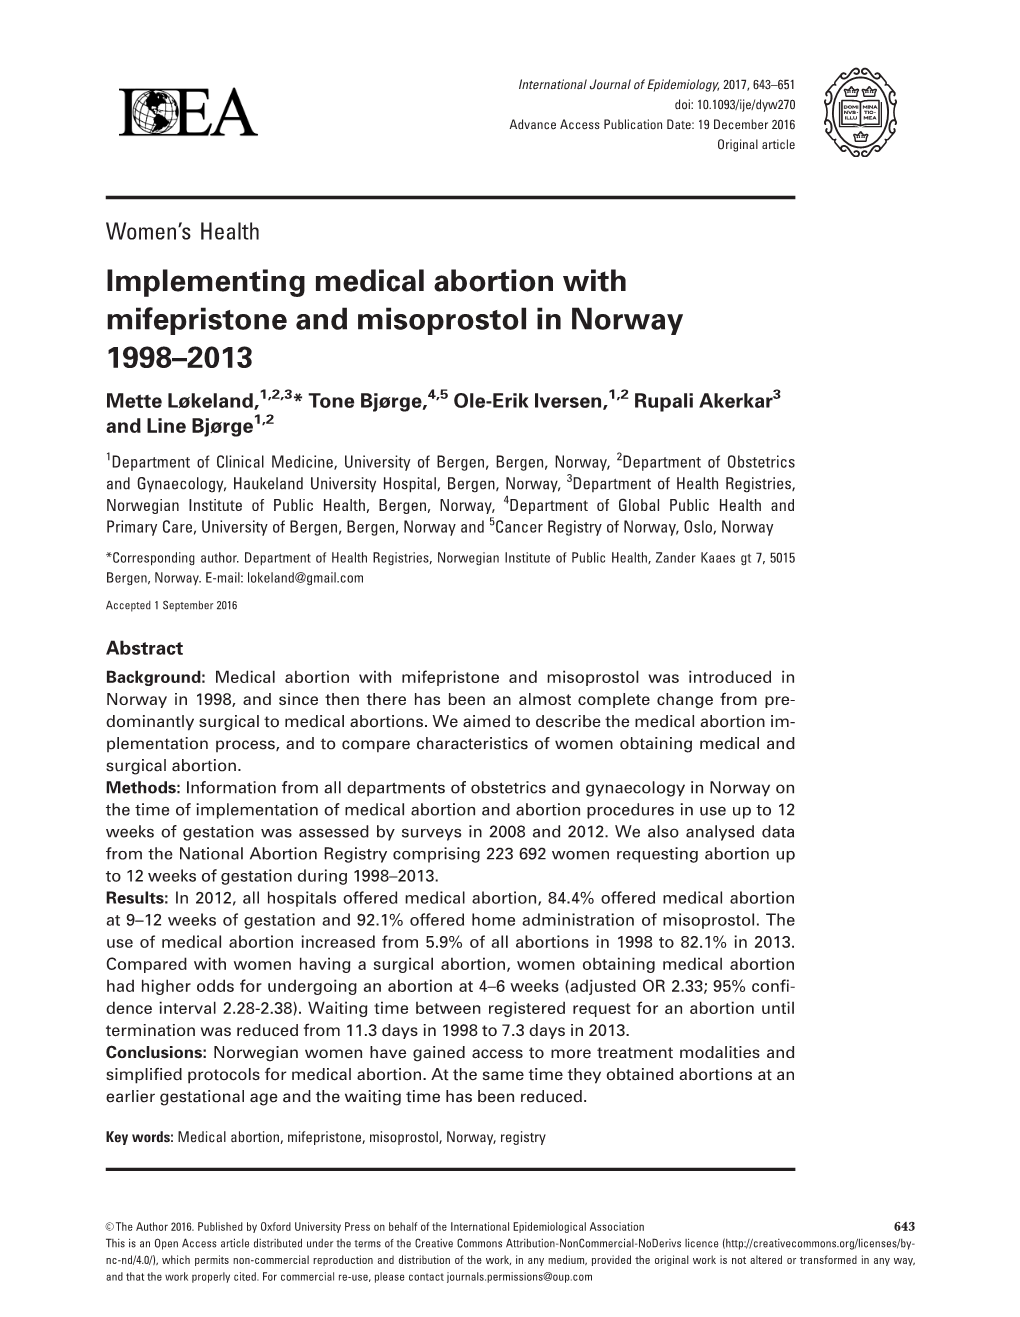 Implementing Medical Abortion with Mifepristone and Misoprostol In